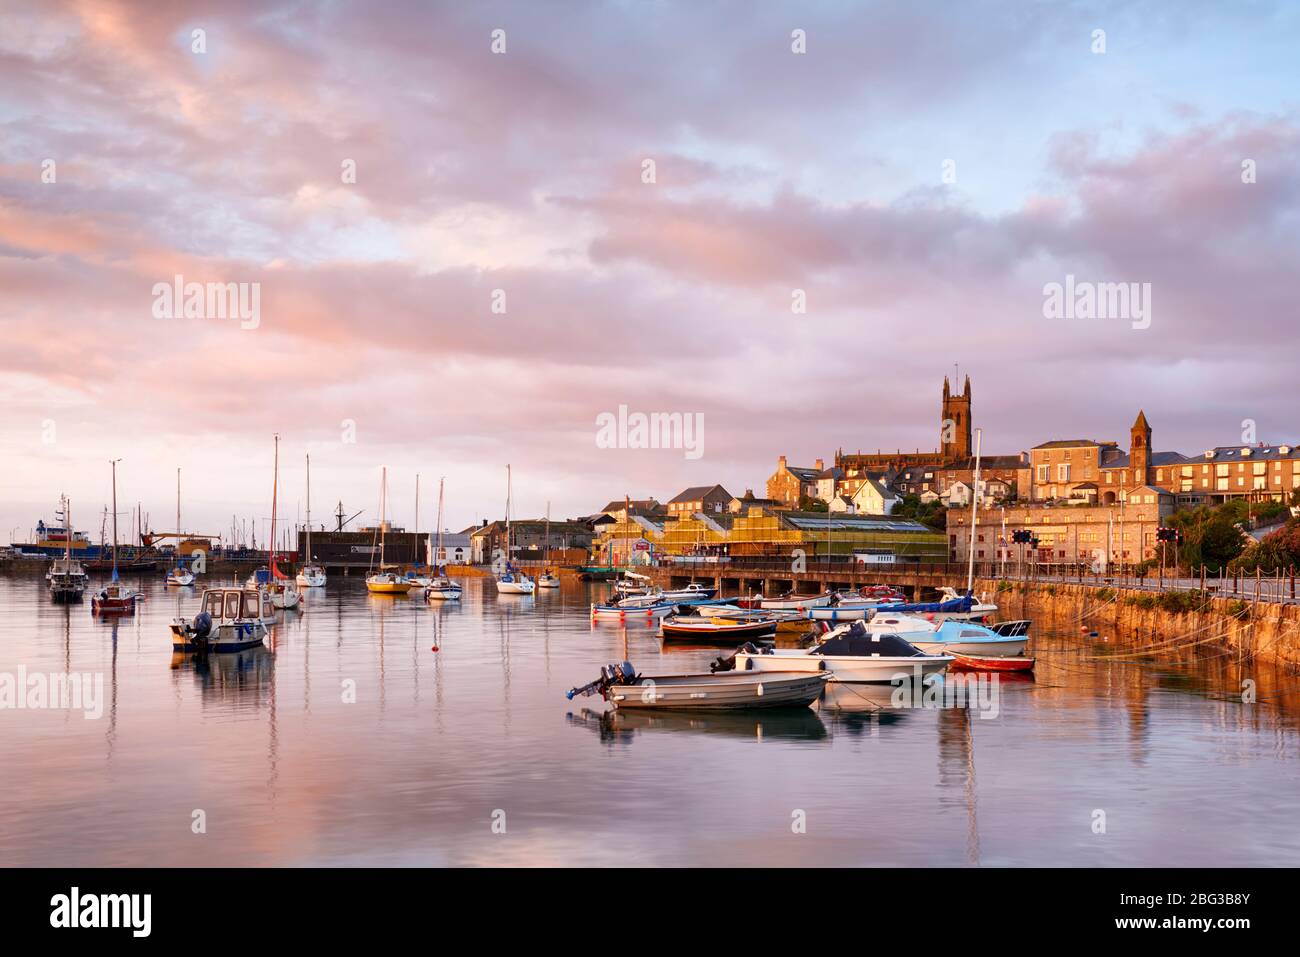 Morning view overlooking Penzance waterfront and Harbour, Cornwall Stock Photo